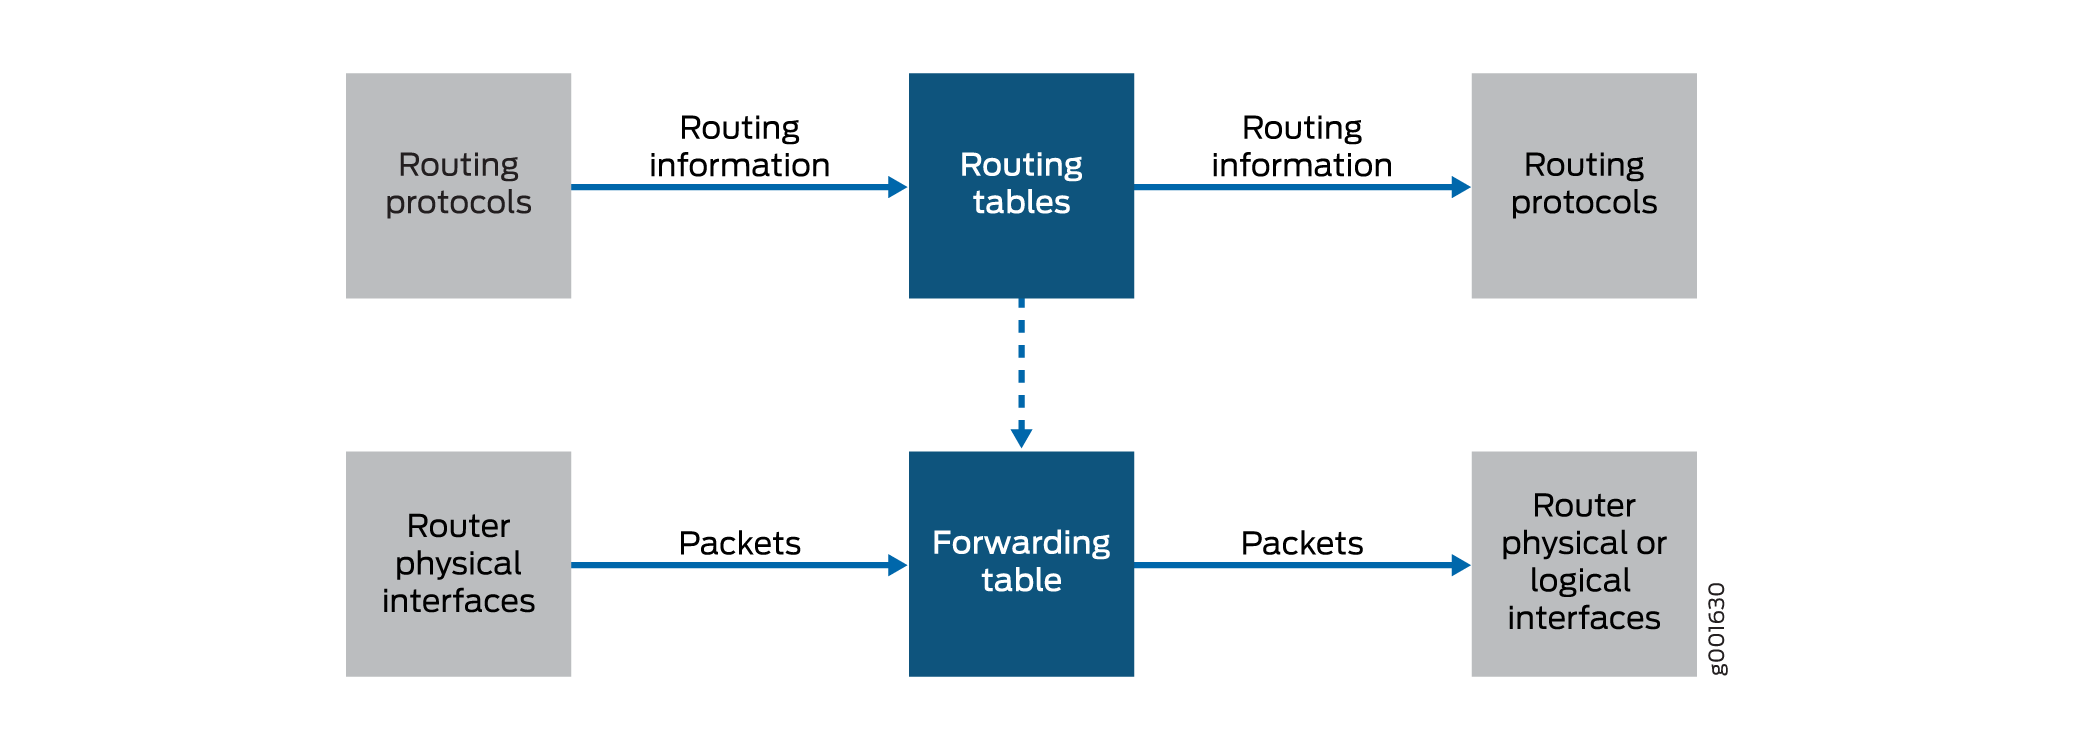 Flows of Routing Information and Packets